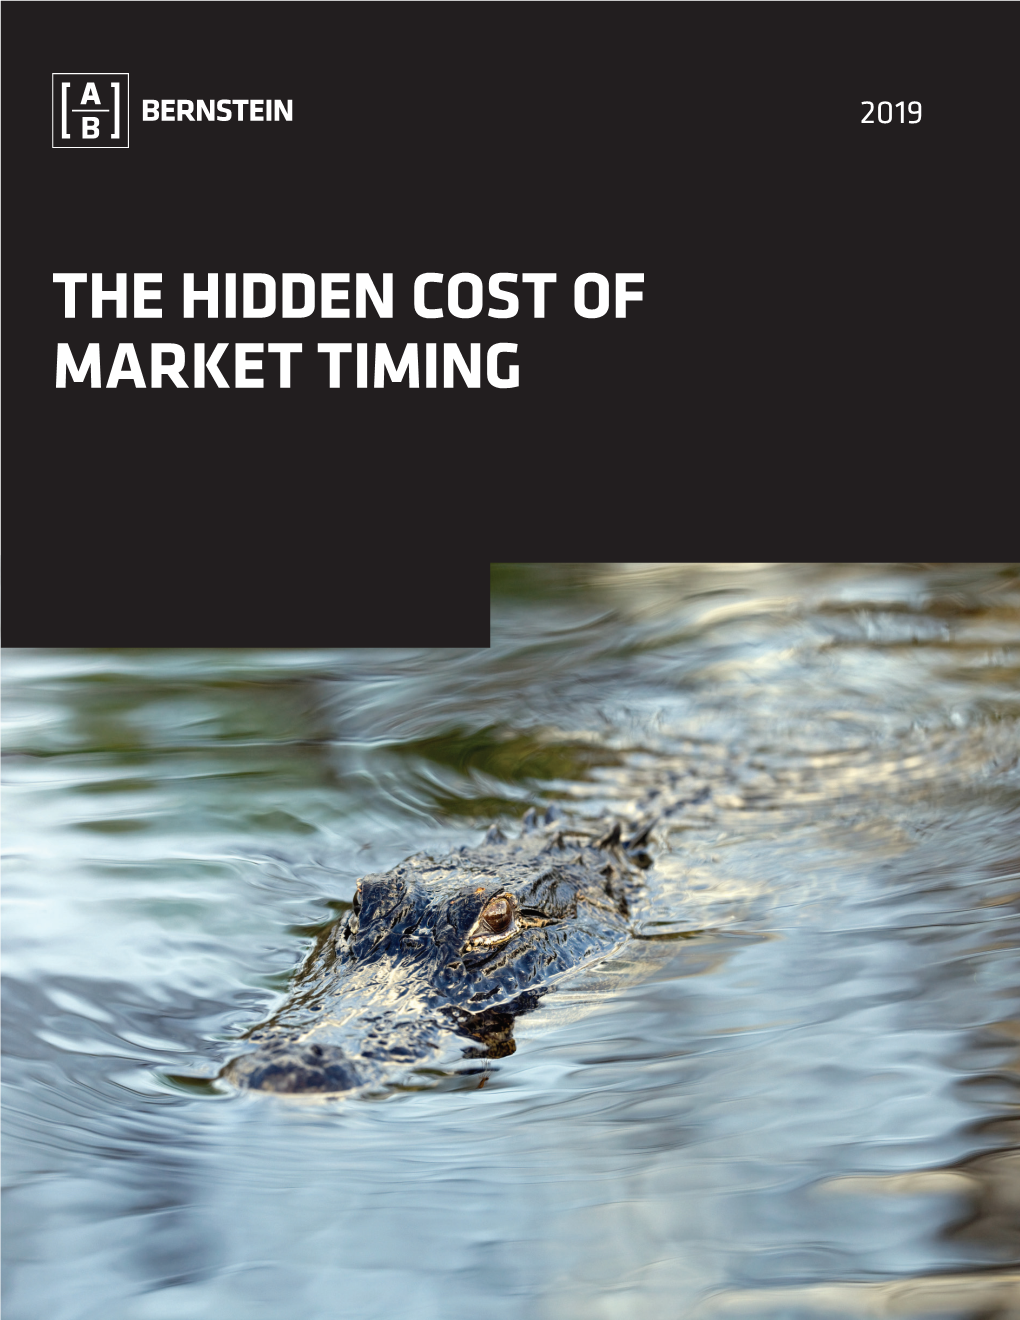 The Hidden Cost of Market Timing